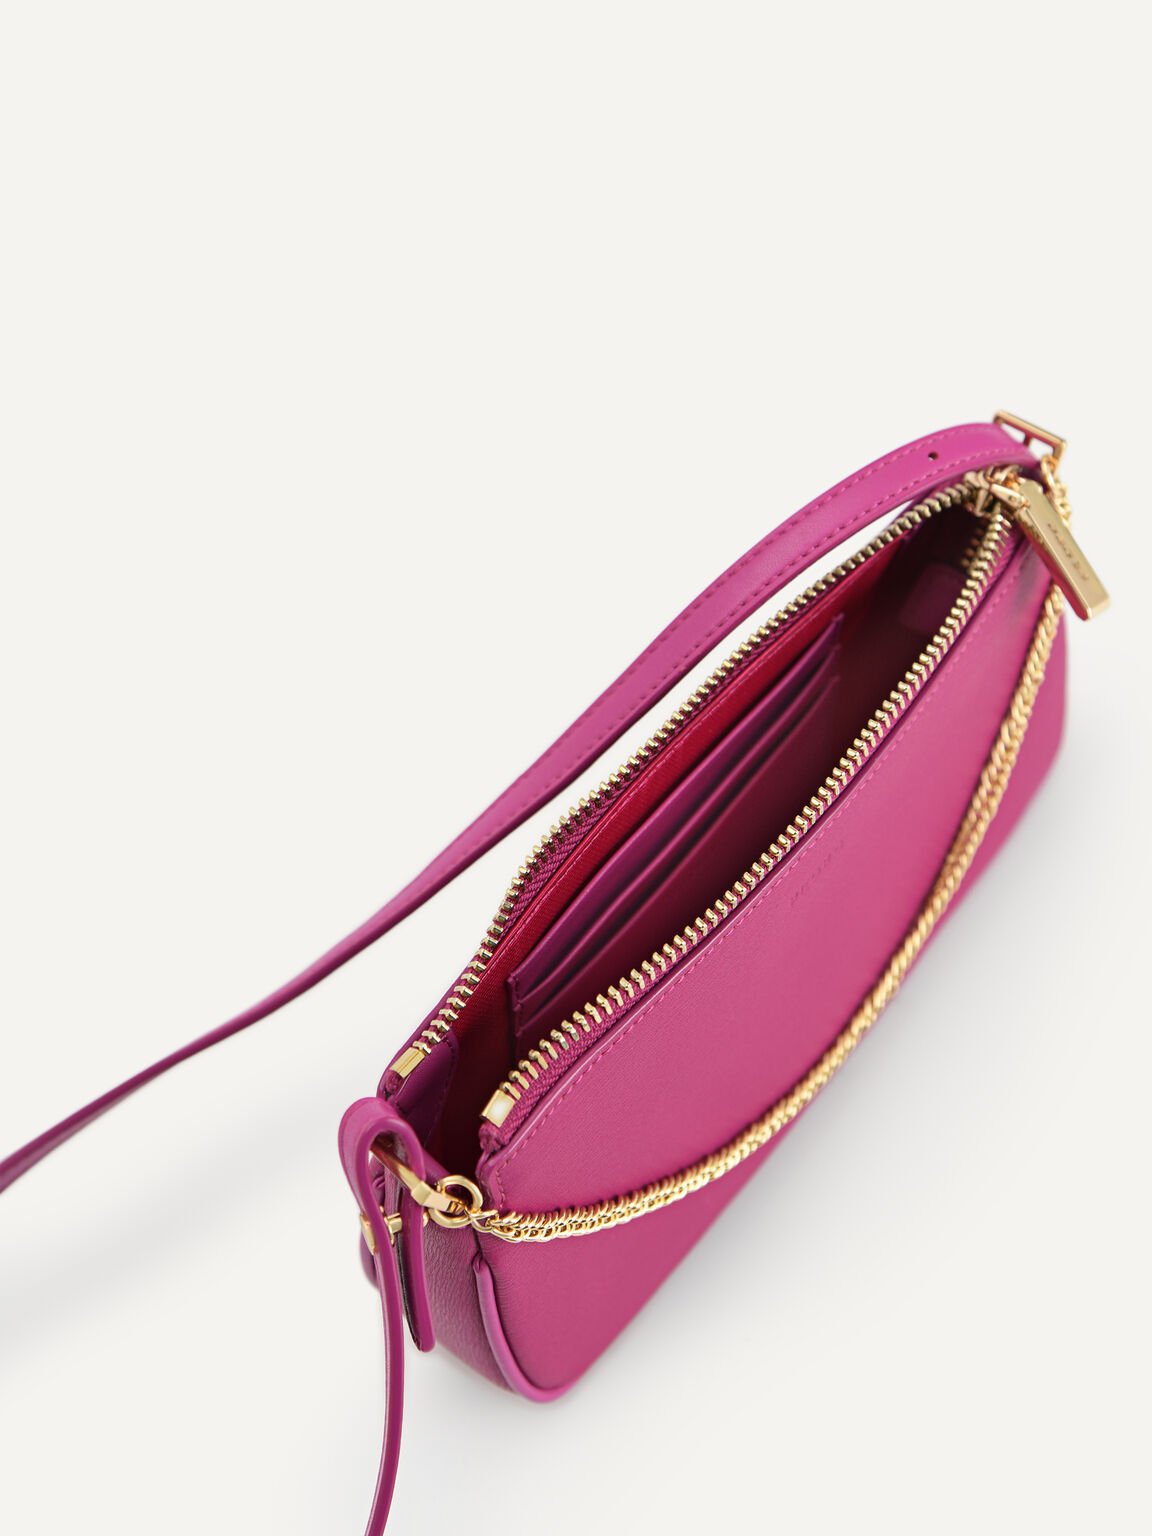 Maddy Leather Chain Detailed Shoulder Bag, Fuchsia